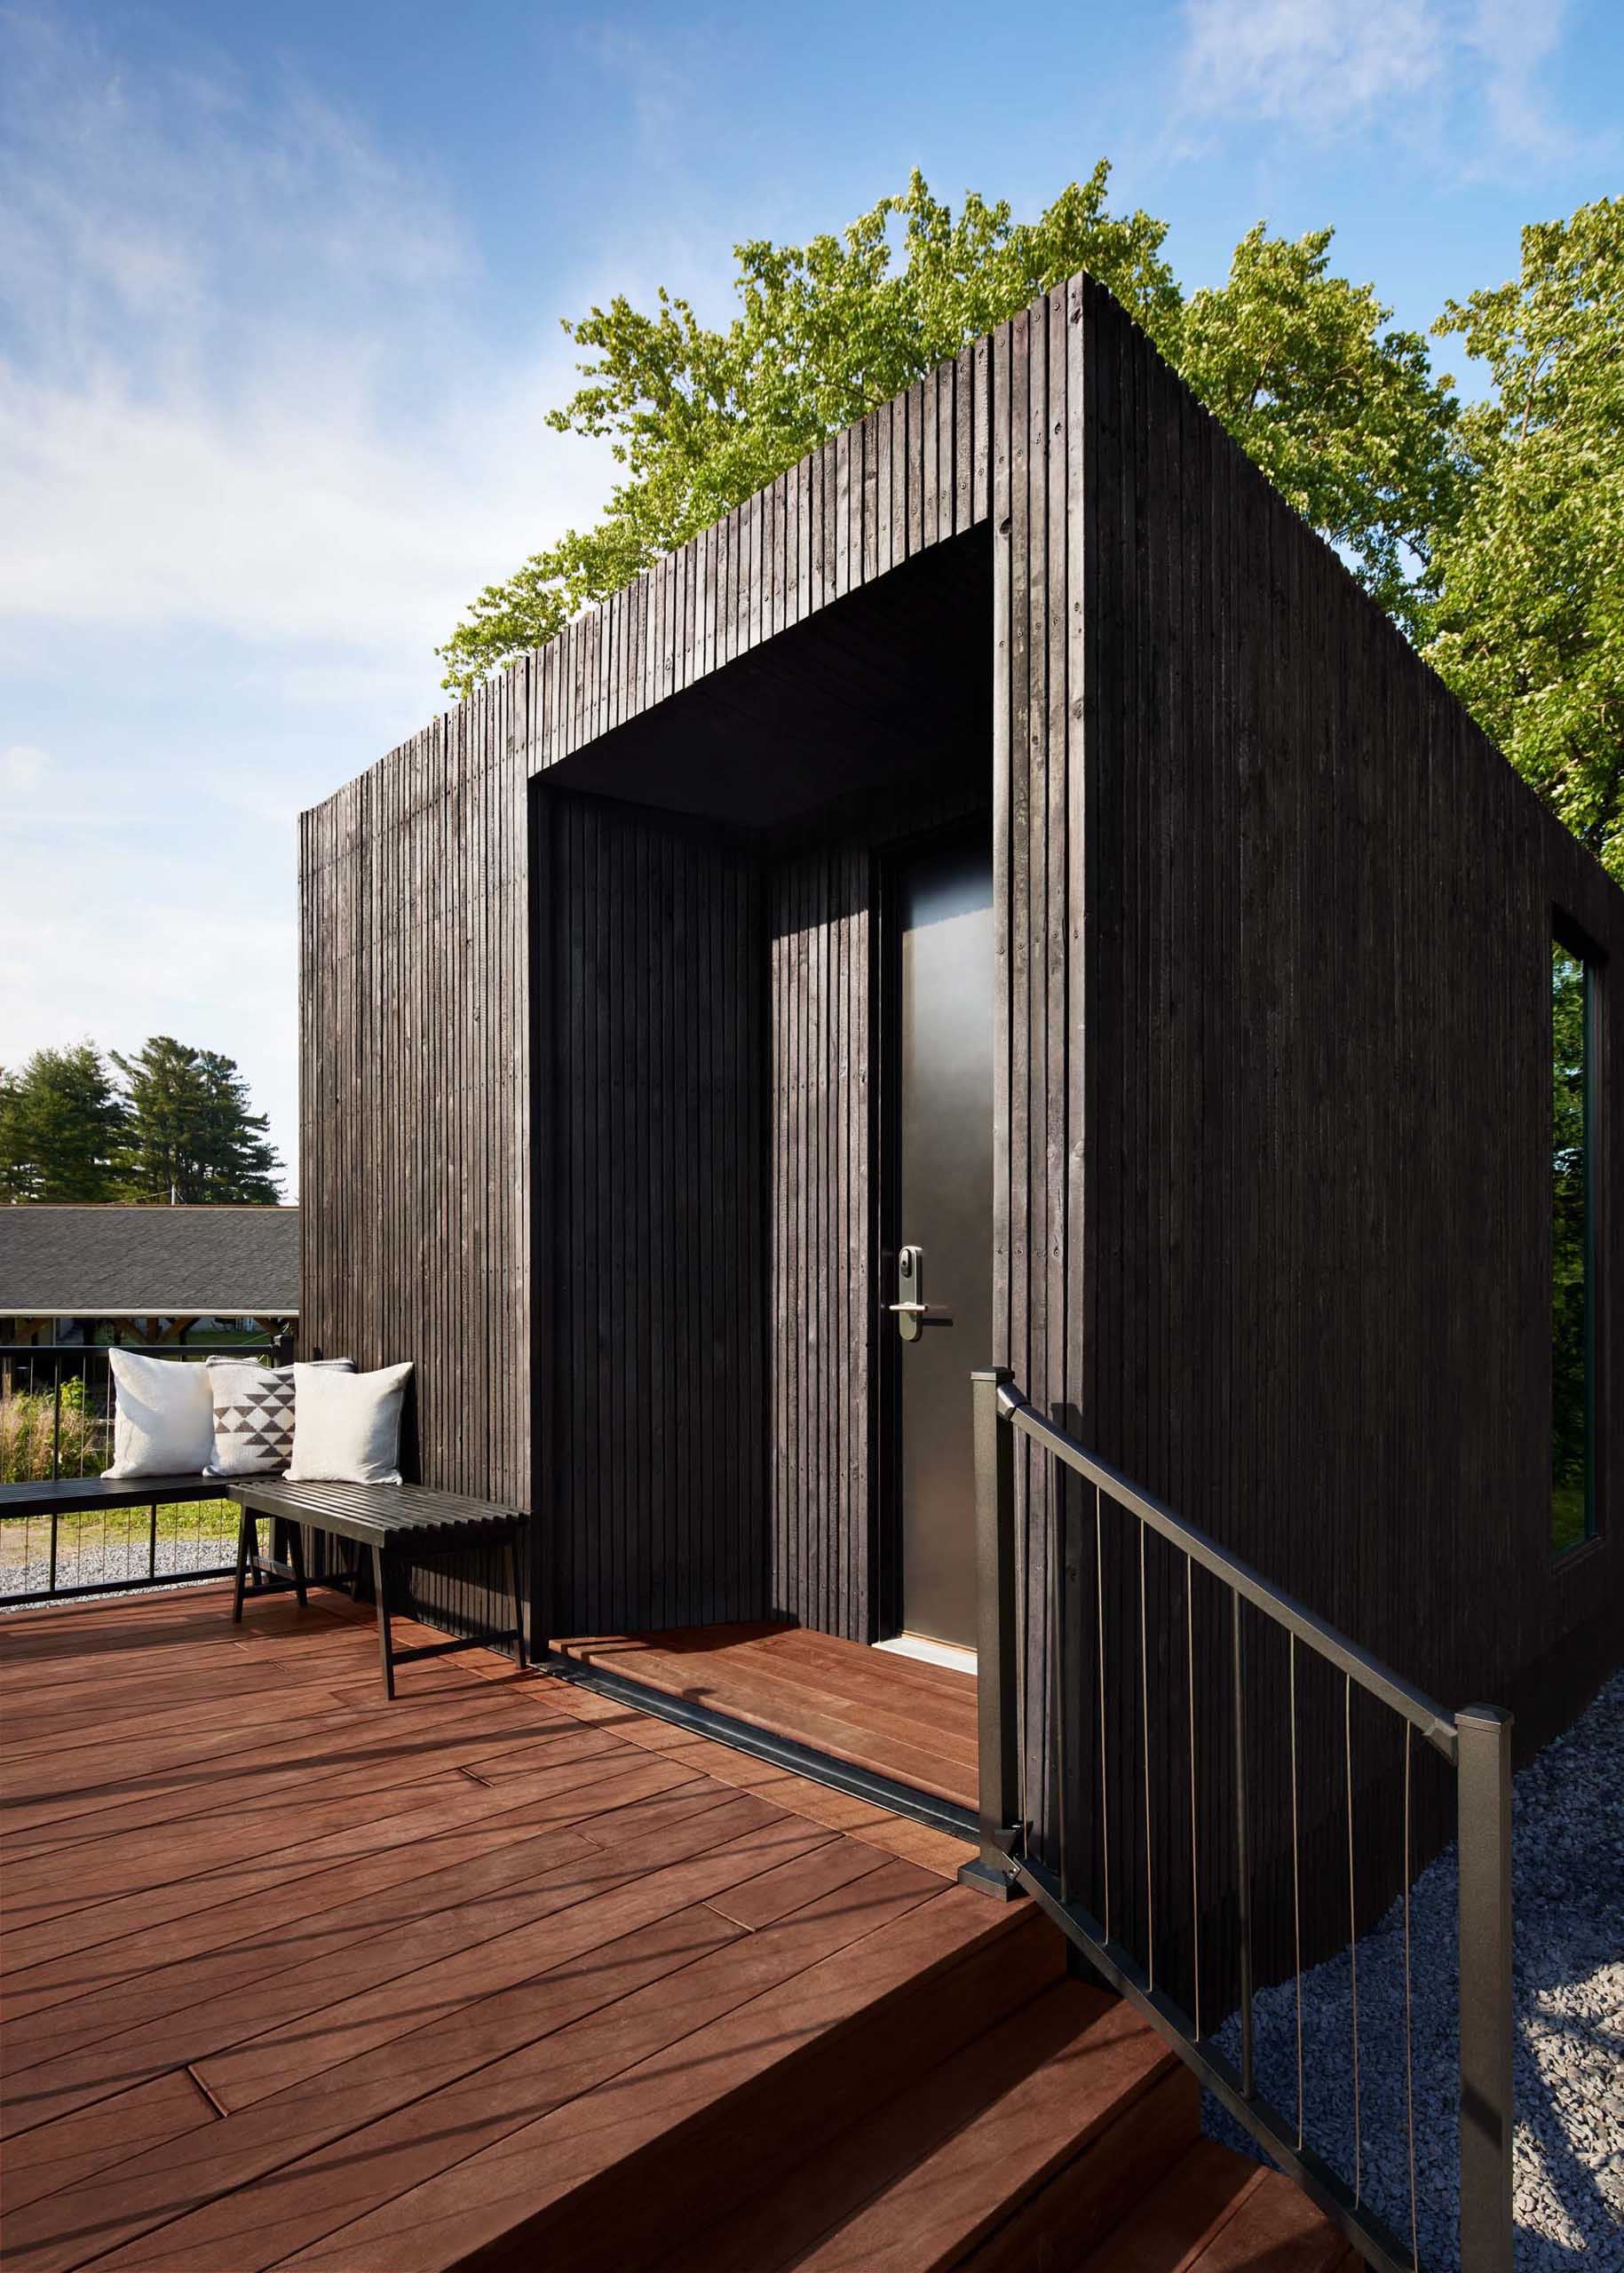 A modern wood-clad prefabricated hotel room with a 120 square foot outdoor deck.